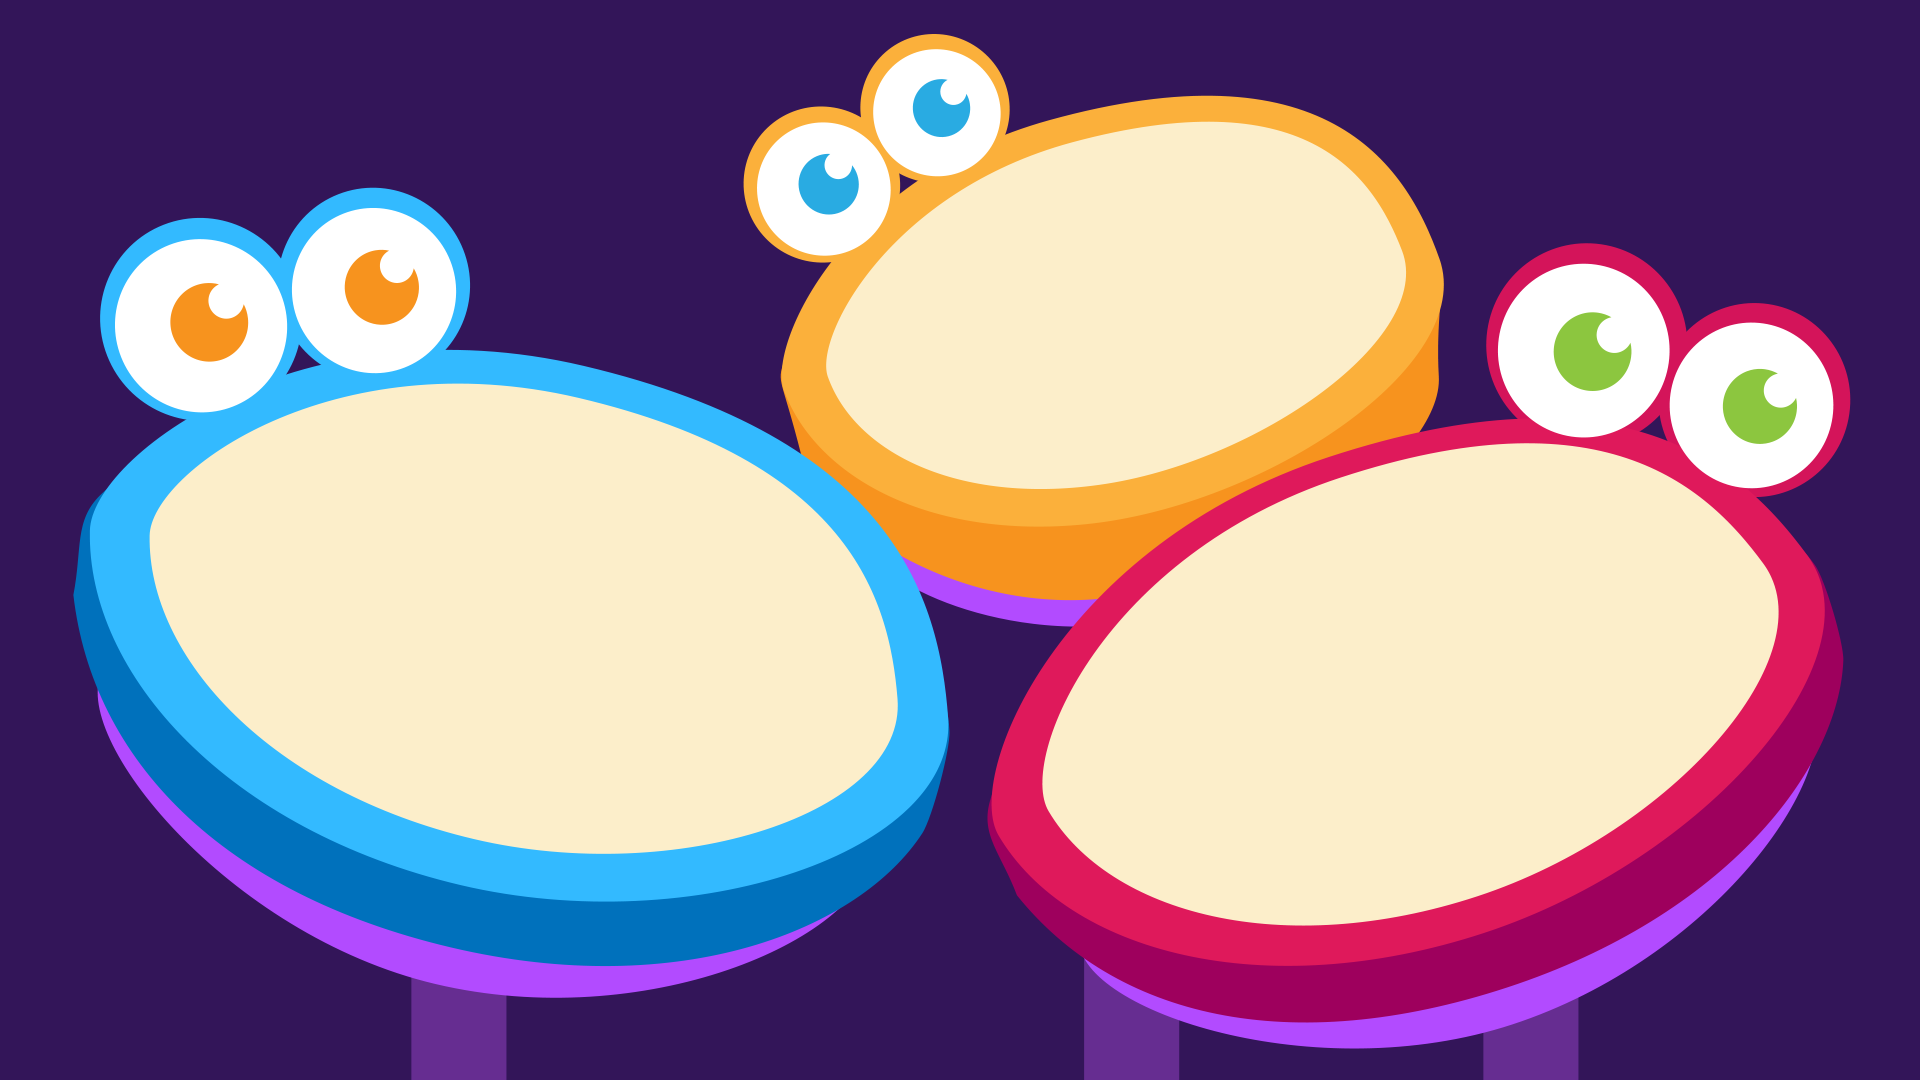 Easy to play drums game, electric drums